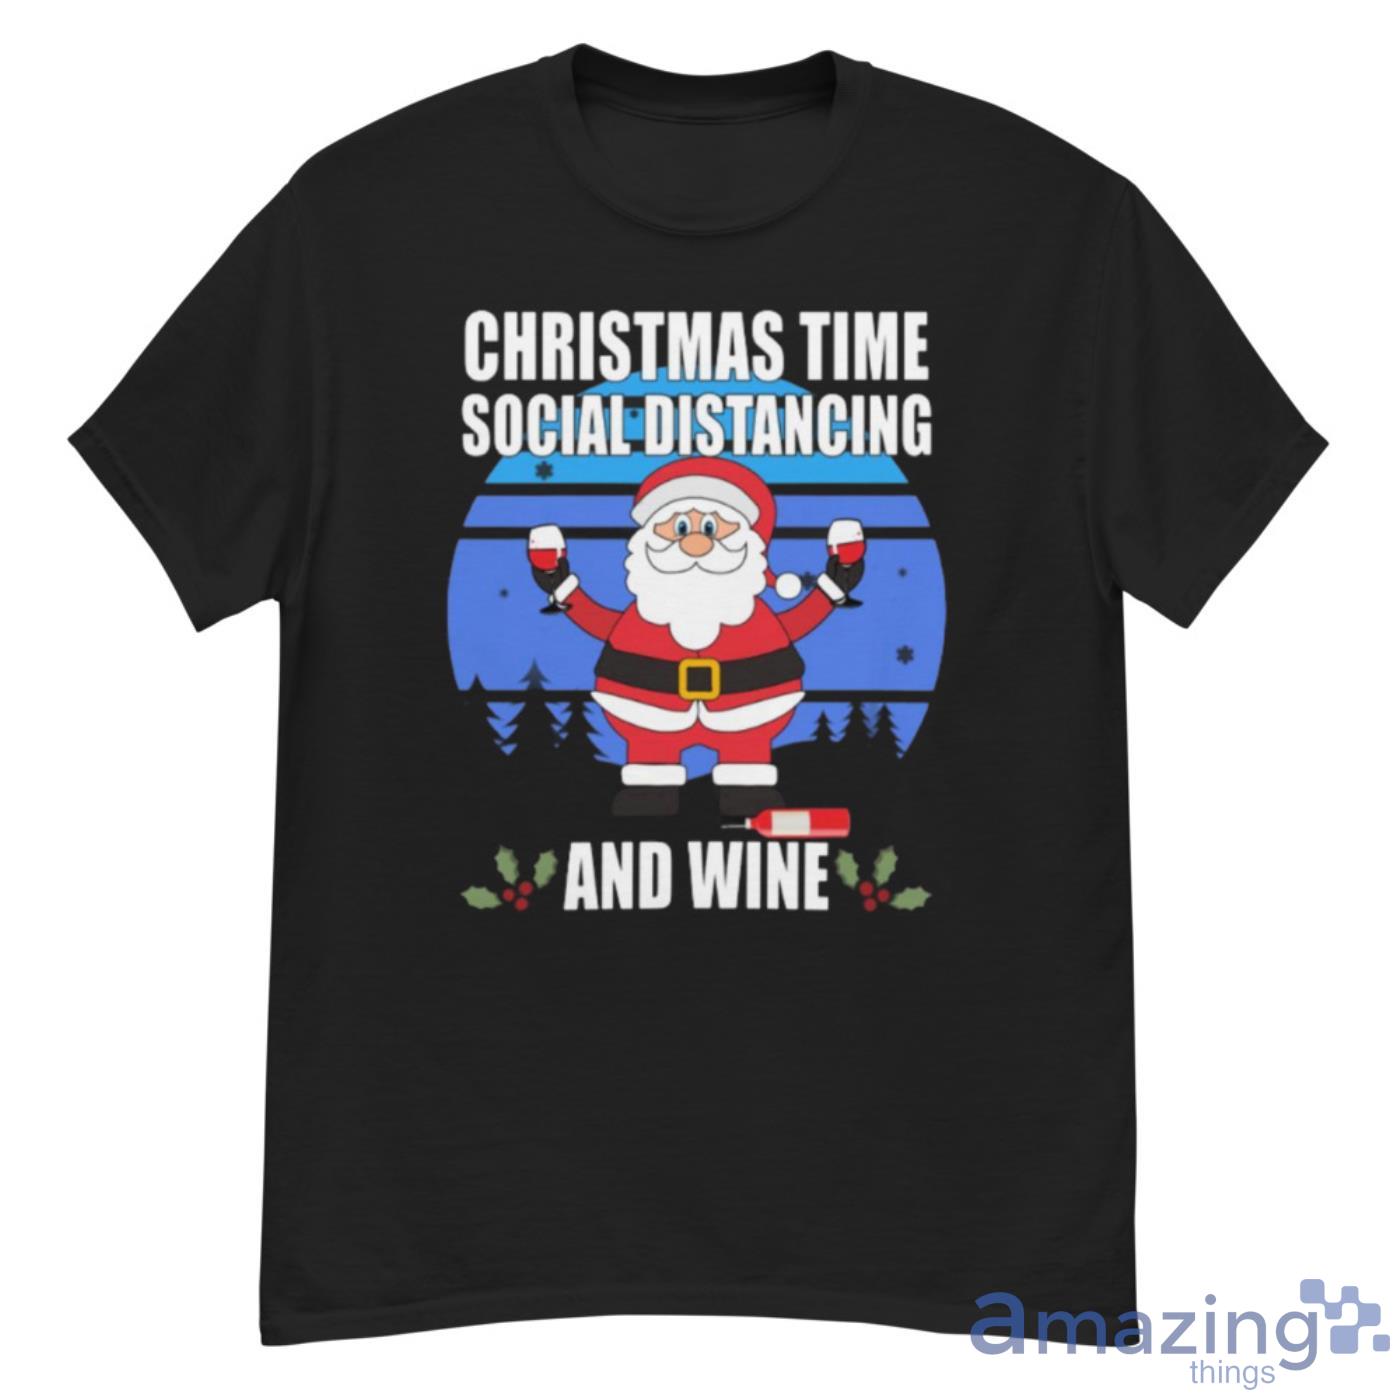 Christmas Time Social Distancing And Wine Shirt - G500 Men’s Classic T-Shirt